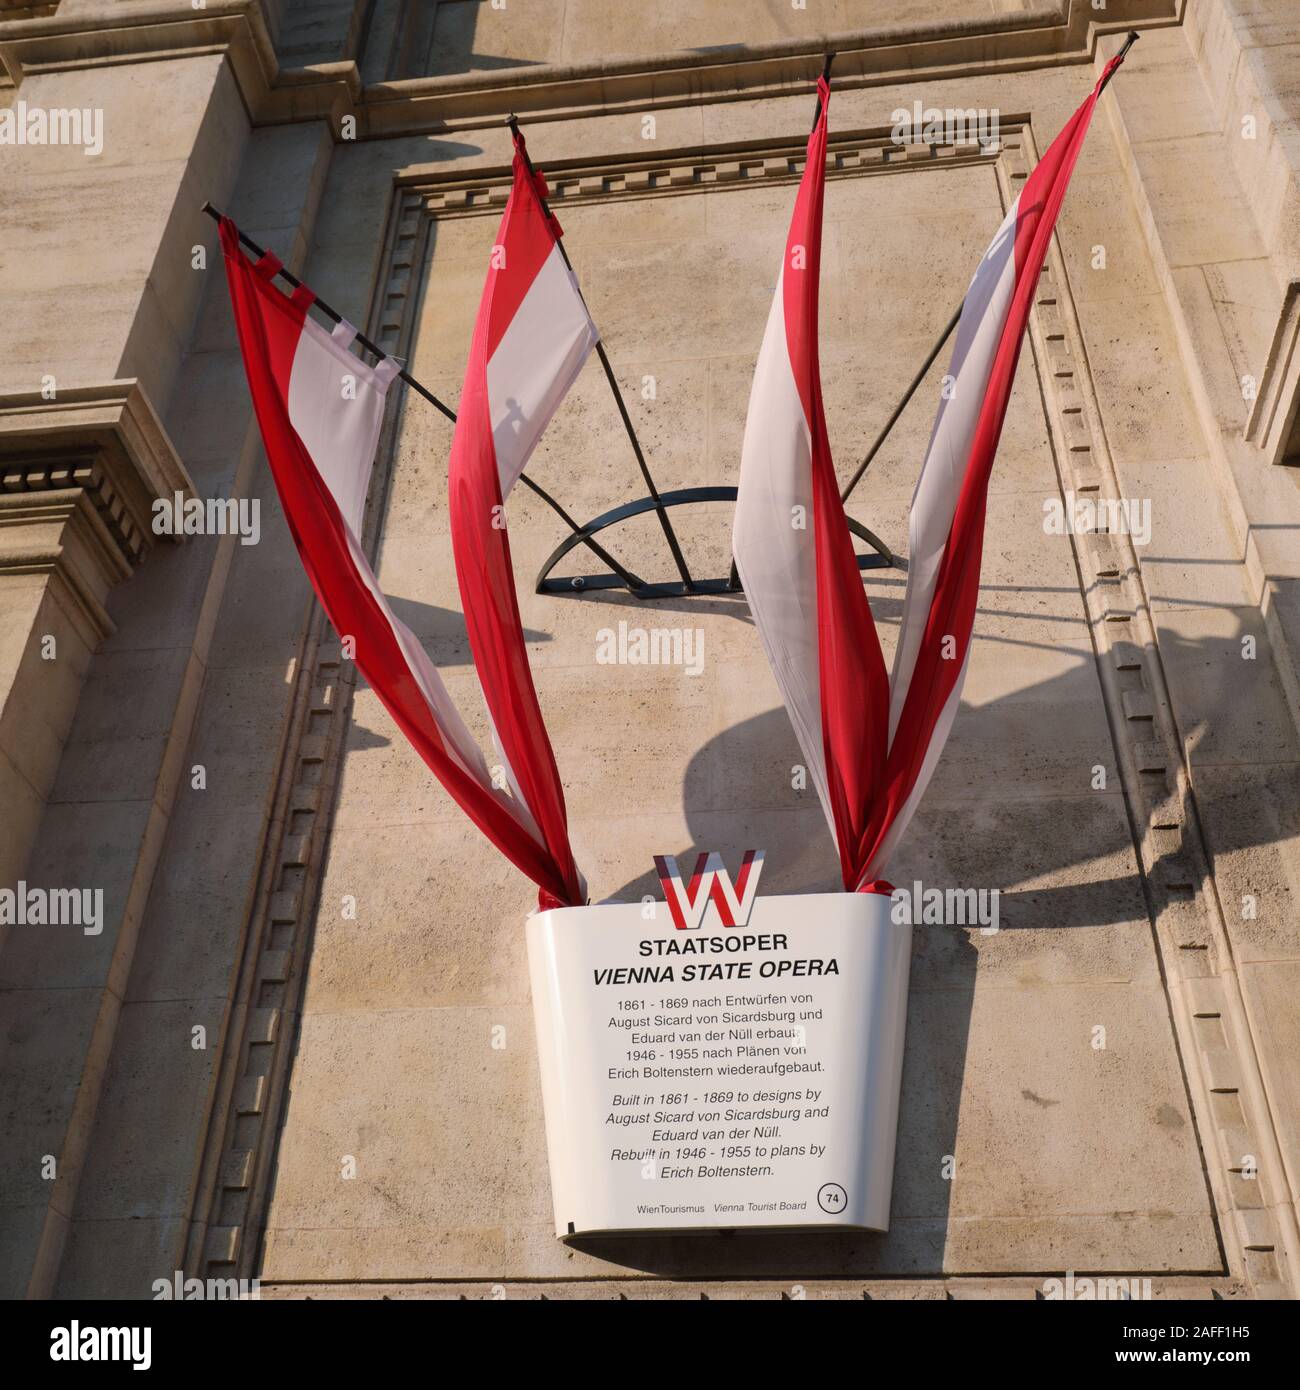 Vienna, Austria - September 16, 2018: Flags of Vienna city at the information board on the building of Vienna State Opera. Built in 1861-1869, the bui Stock Photo